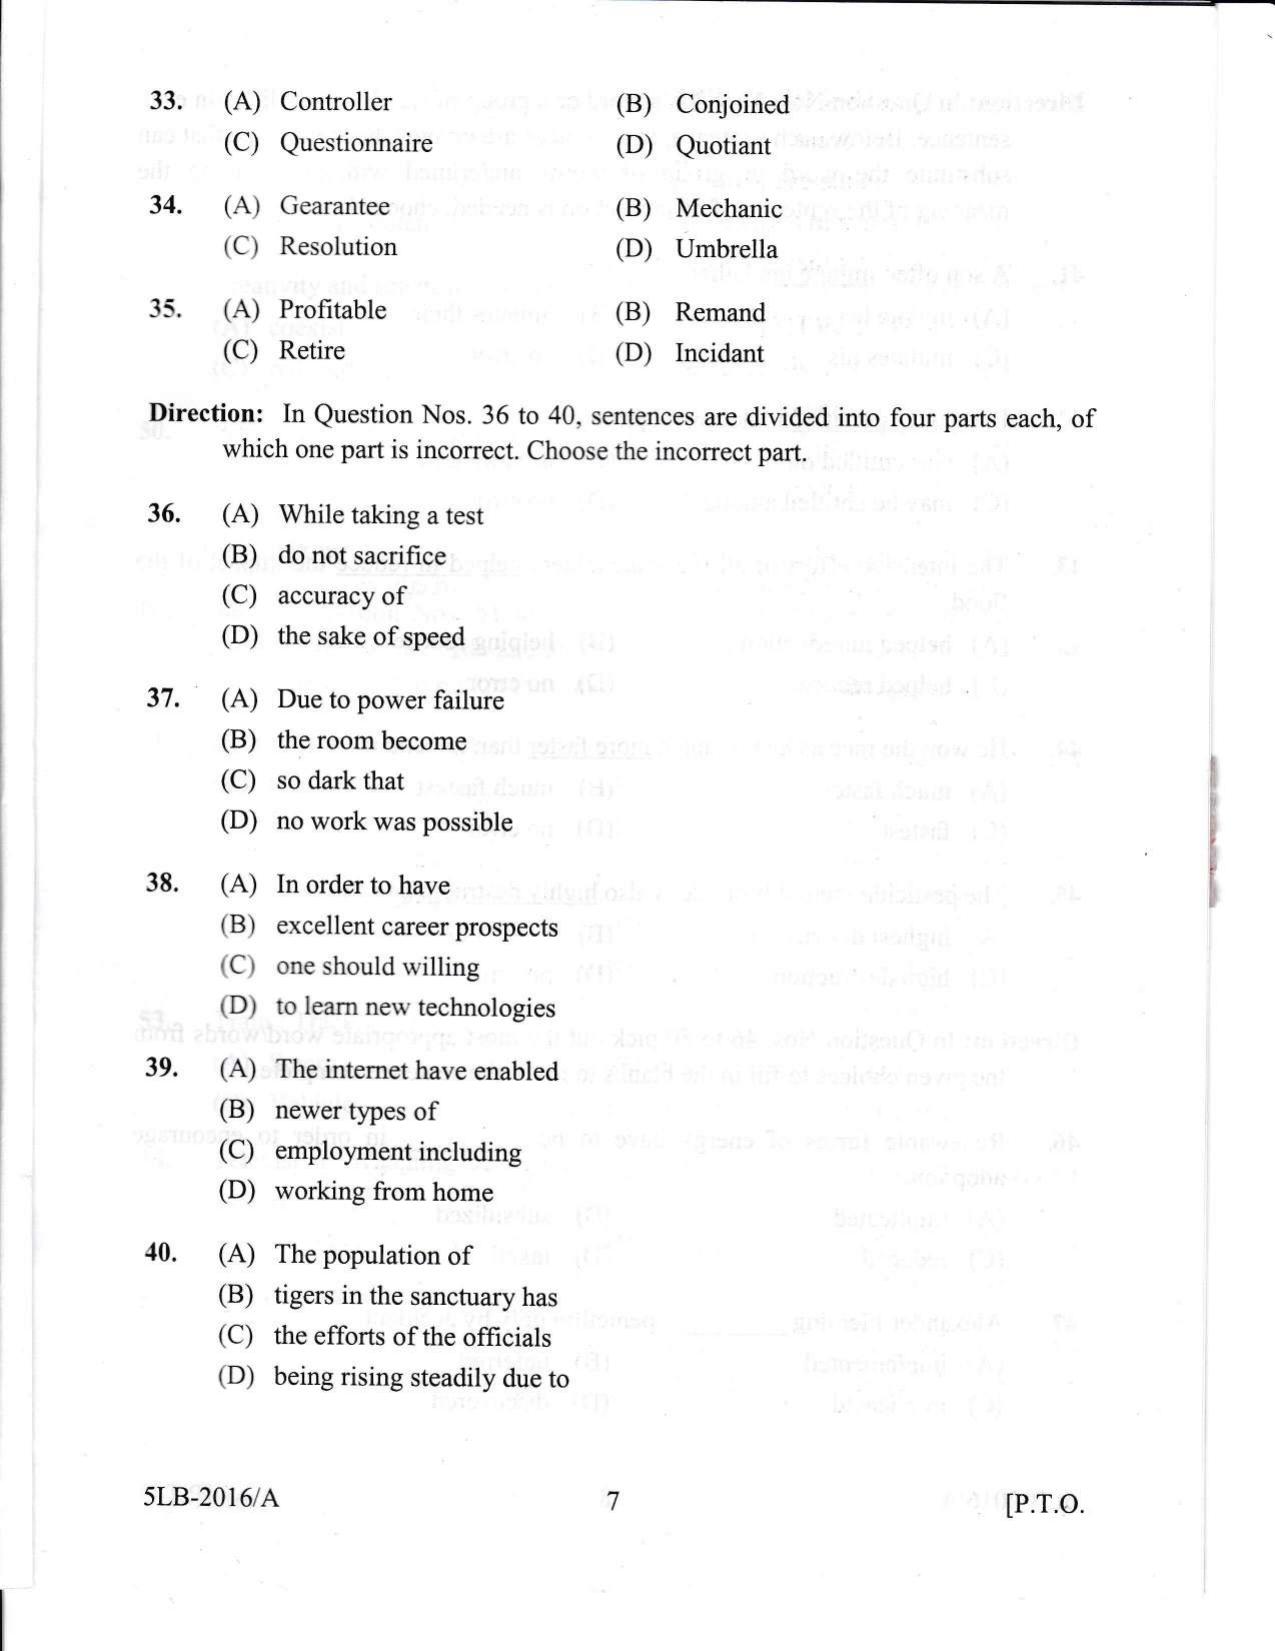 KLEE 5 Year LLB Exam 2016 Question Paper - Page 7